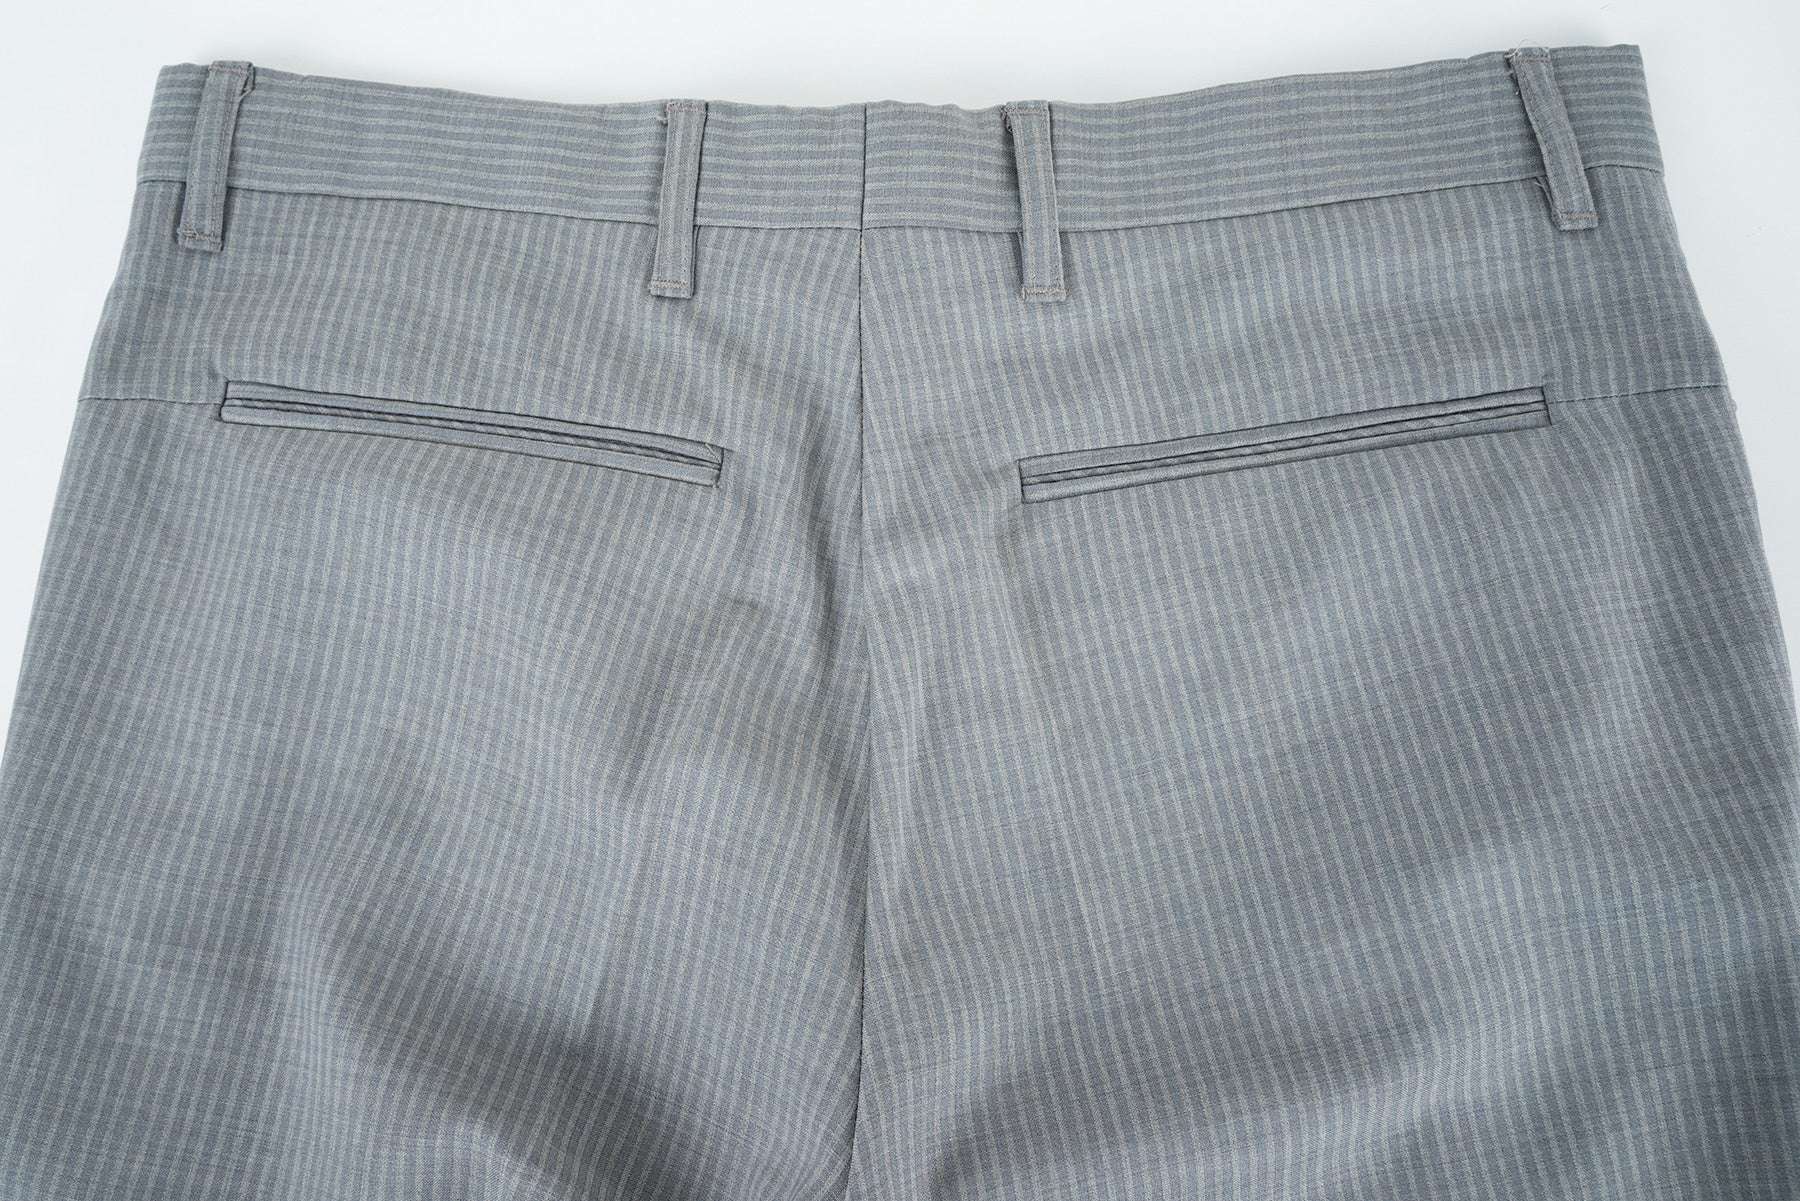 2008 S/S TROPICAL WOOL WIDE CUT TROUSERS WITH POCKET DETAILS